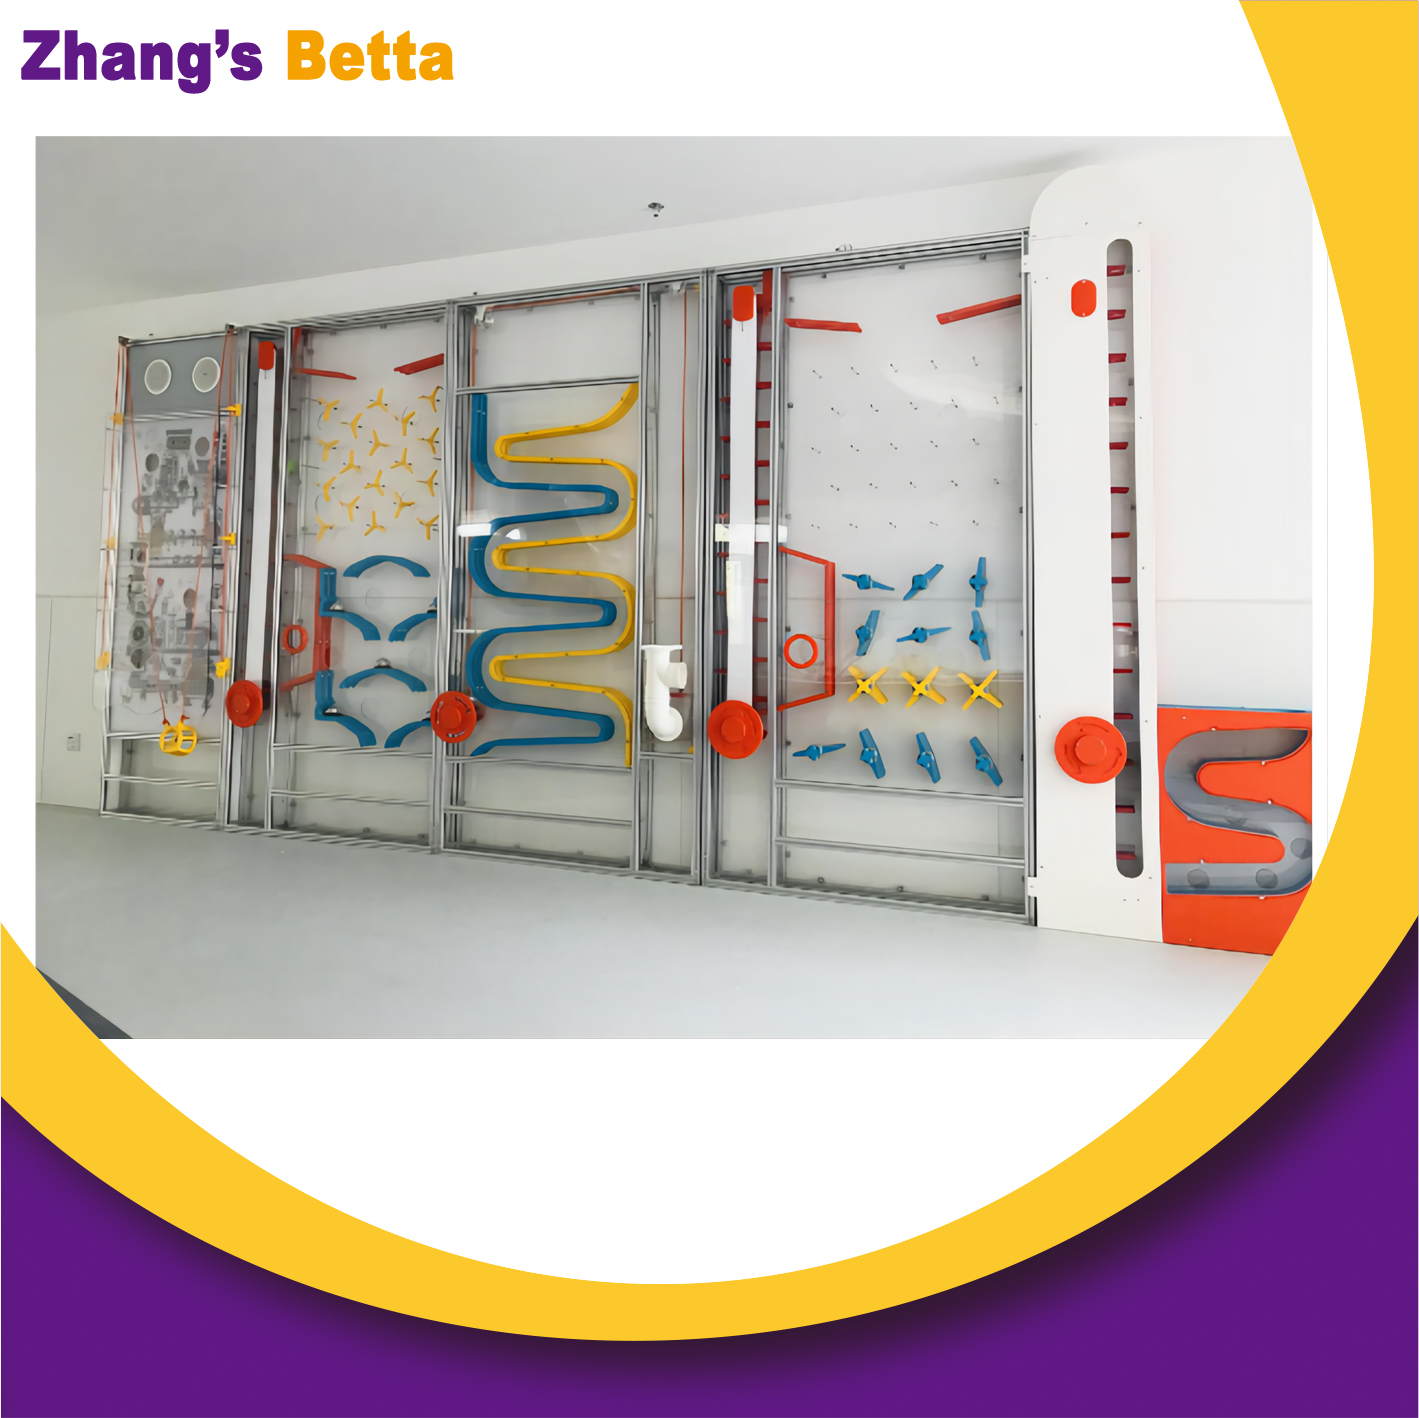 Sensory Wall Tube Toys - Buy Tube Wall Toys manufacturers from China, Tube Wall  Toys manufacturers from Thailand, Tube Wall Toys Equipment suppliers for  American Product on Bettaplay Kids' Zone Builder 